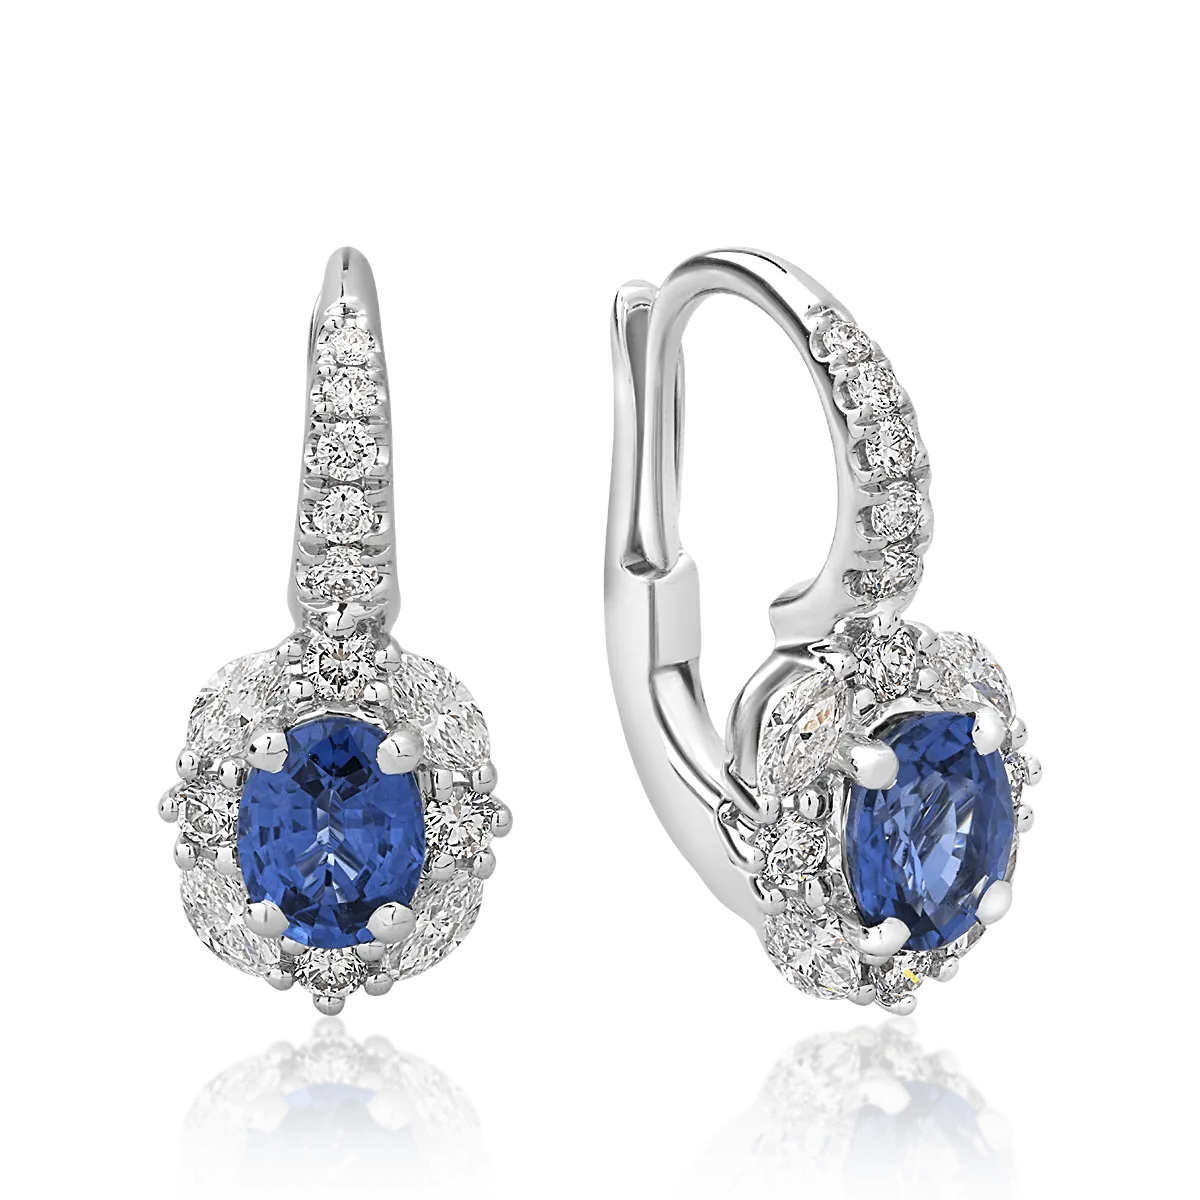 18K white gold earrings with 1.23ct sapphires and 0.38ct diamonds